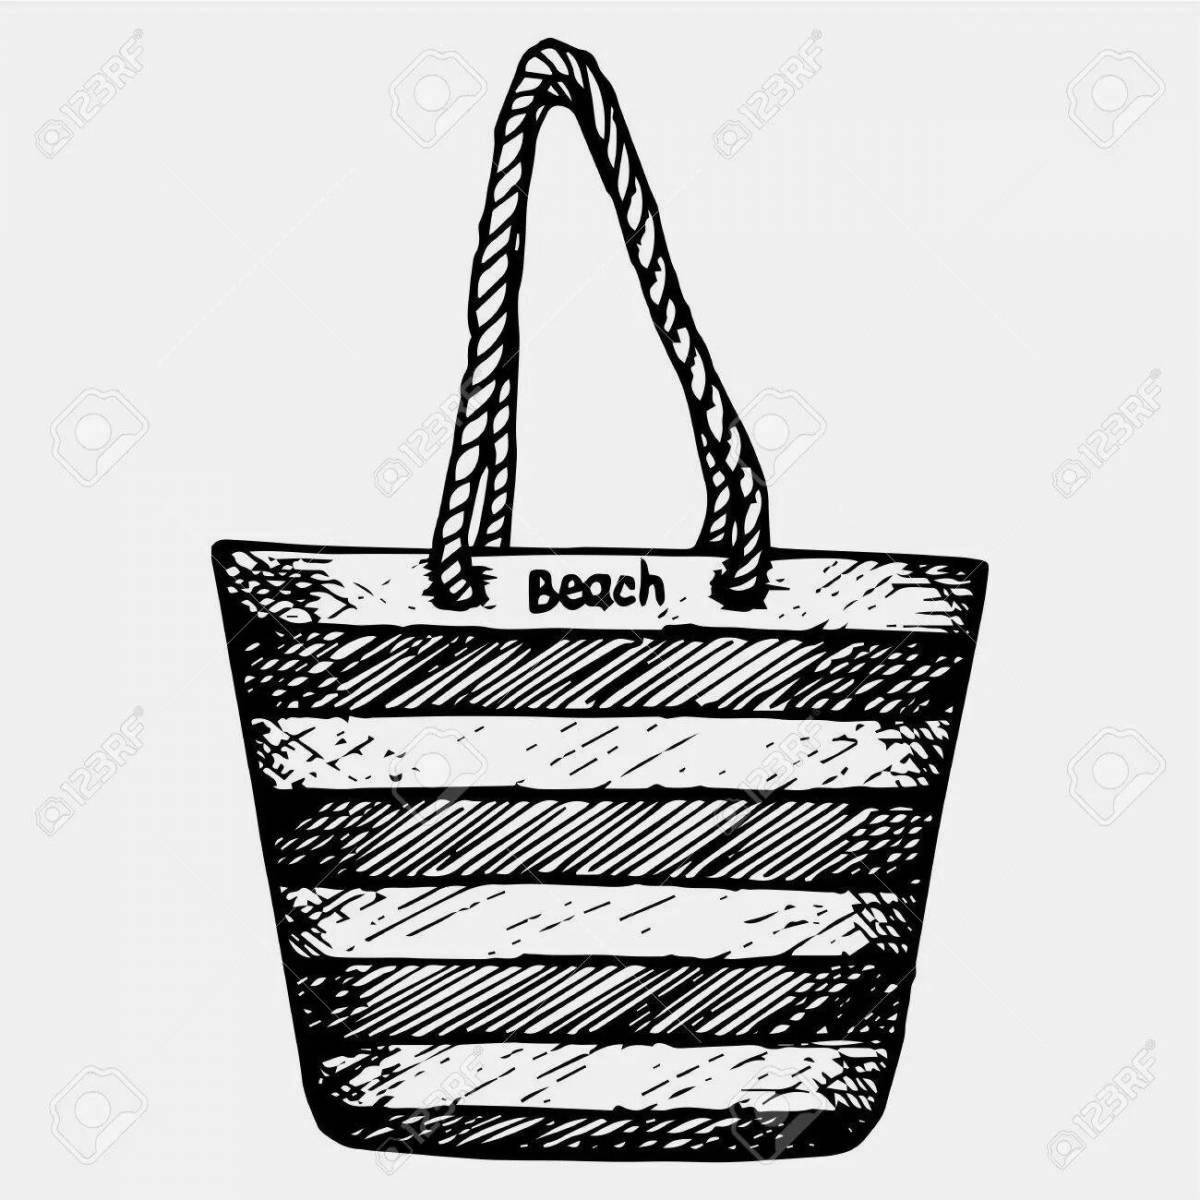 Beach bag coloring page